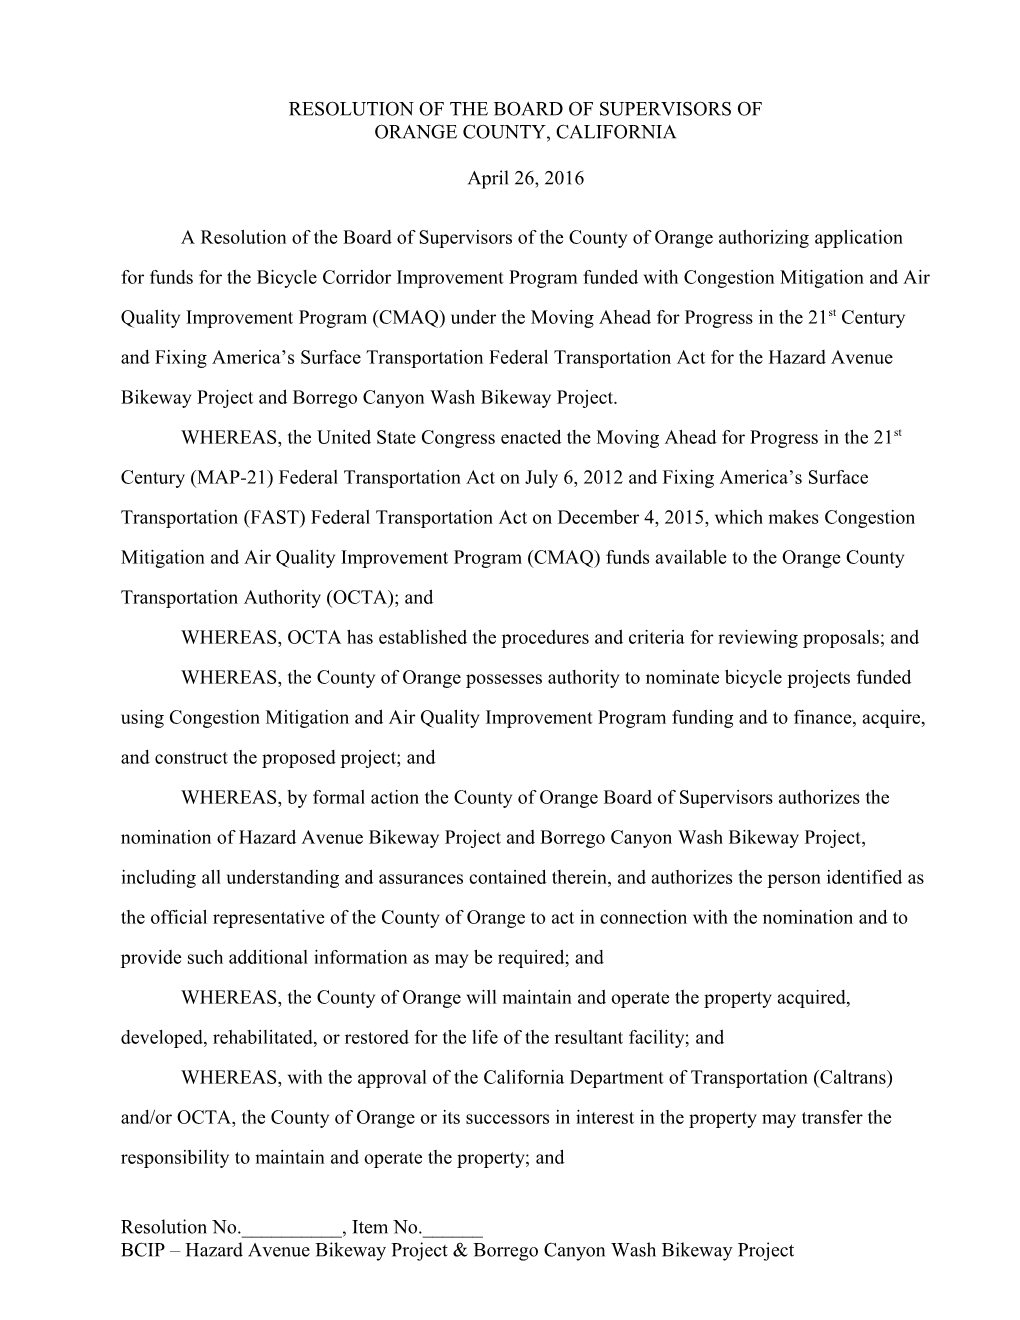 Resolution of the City Council of the City/County of ______ Concerning the Status of The